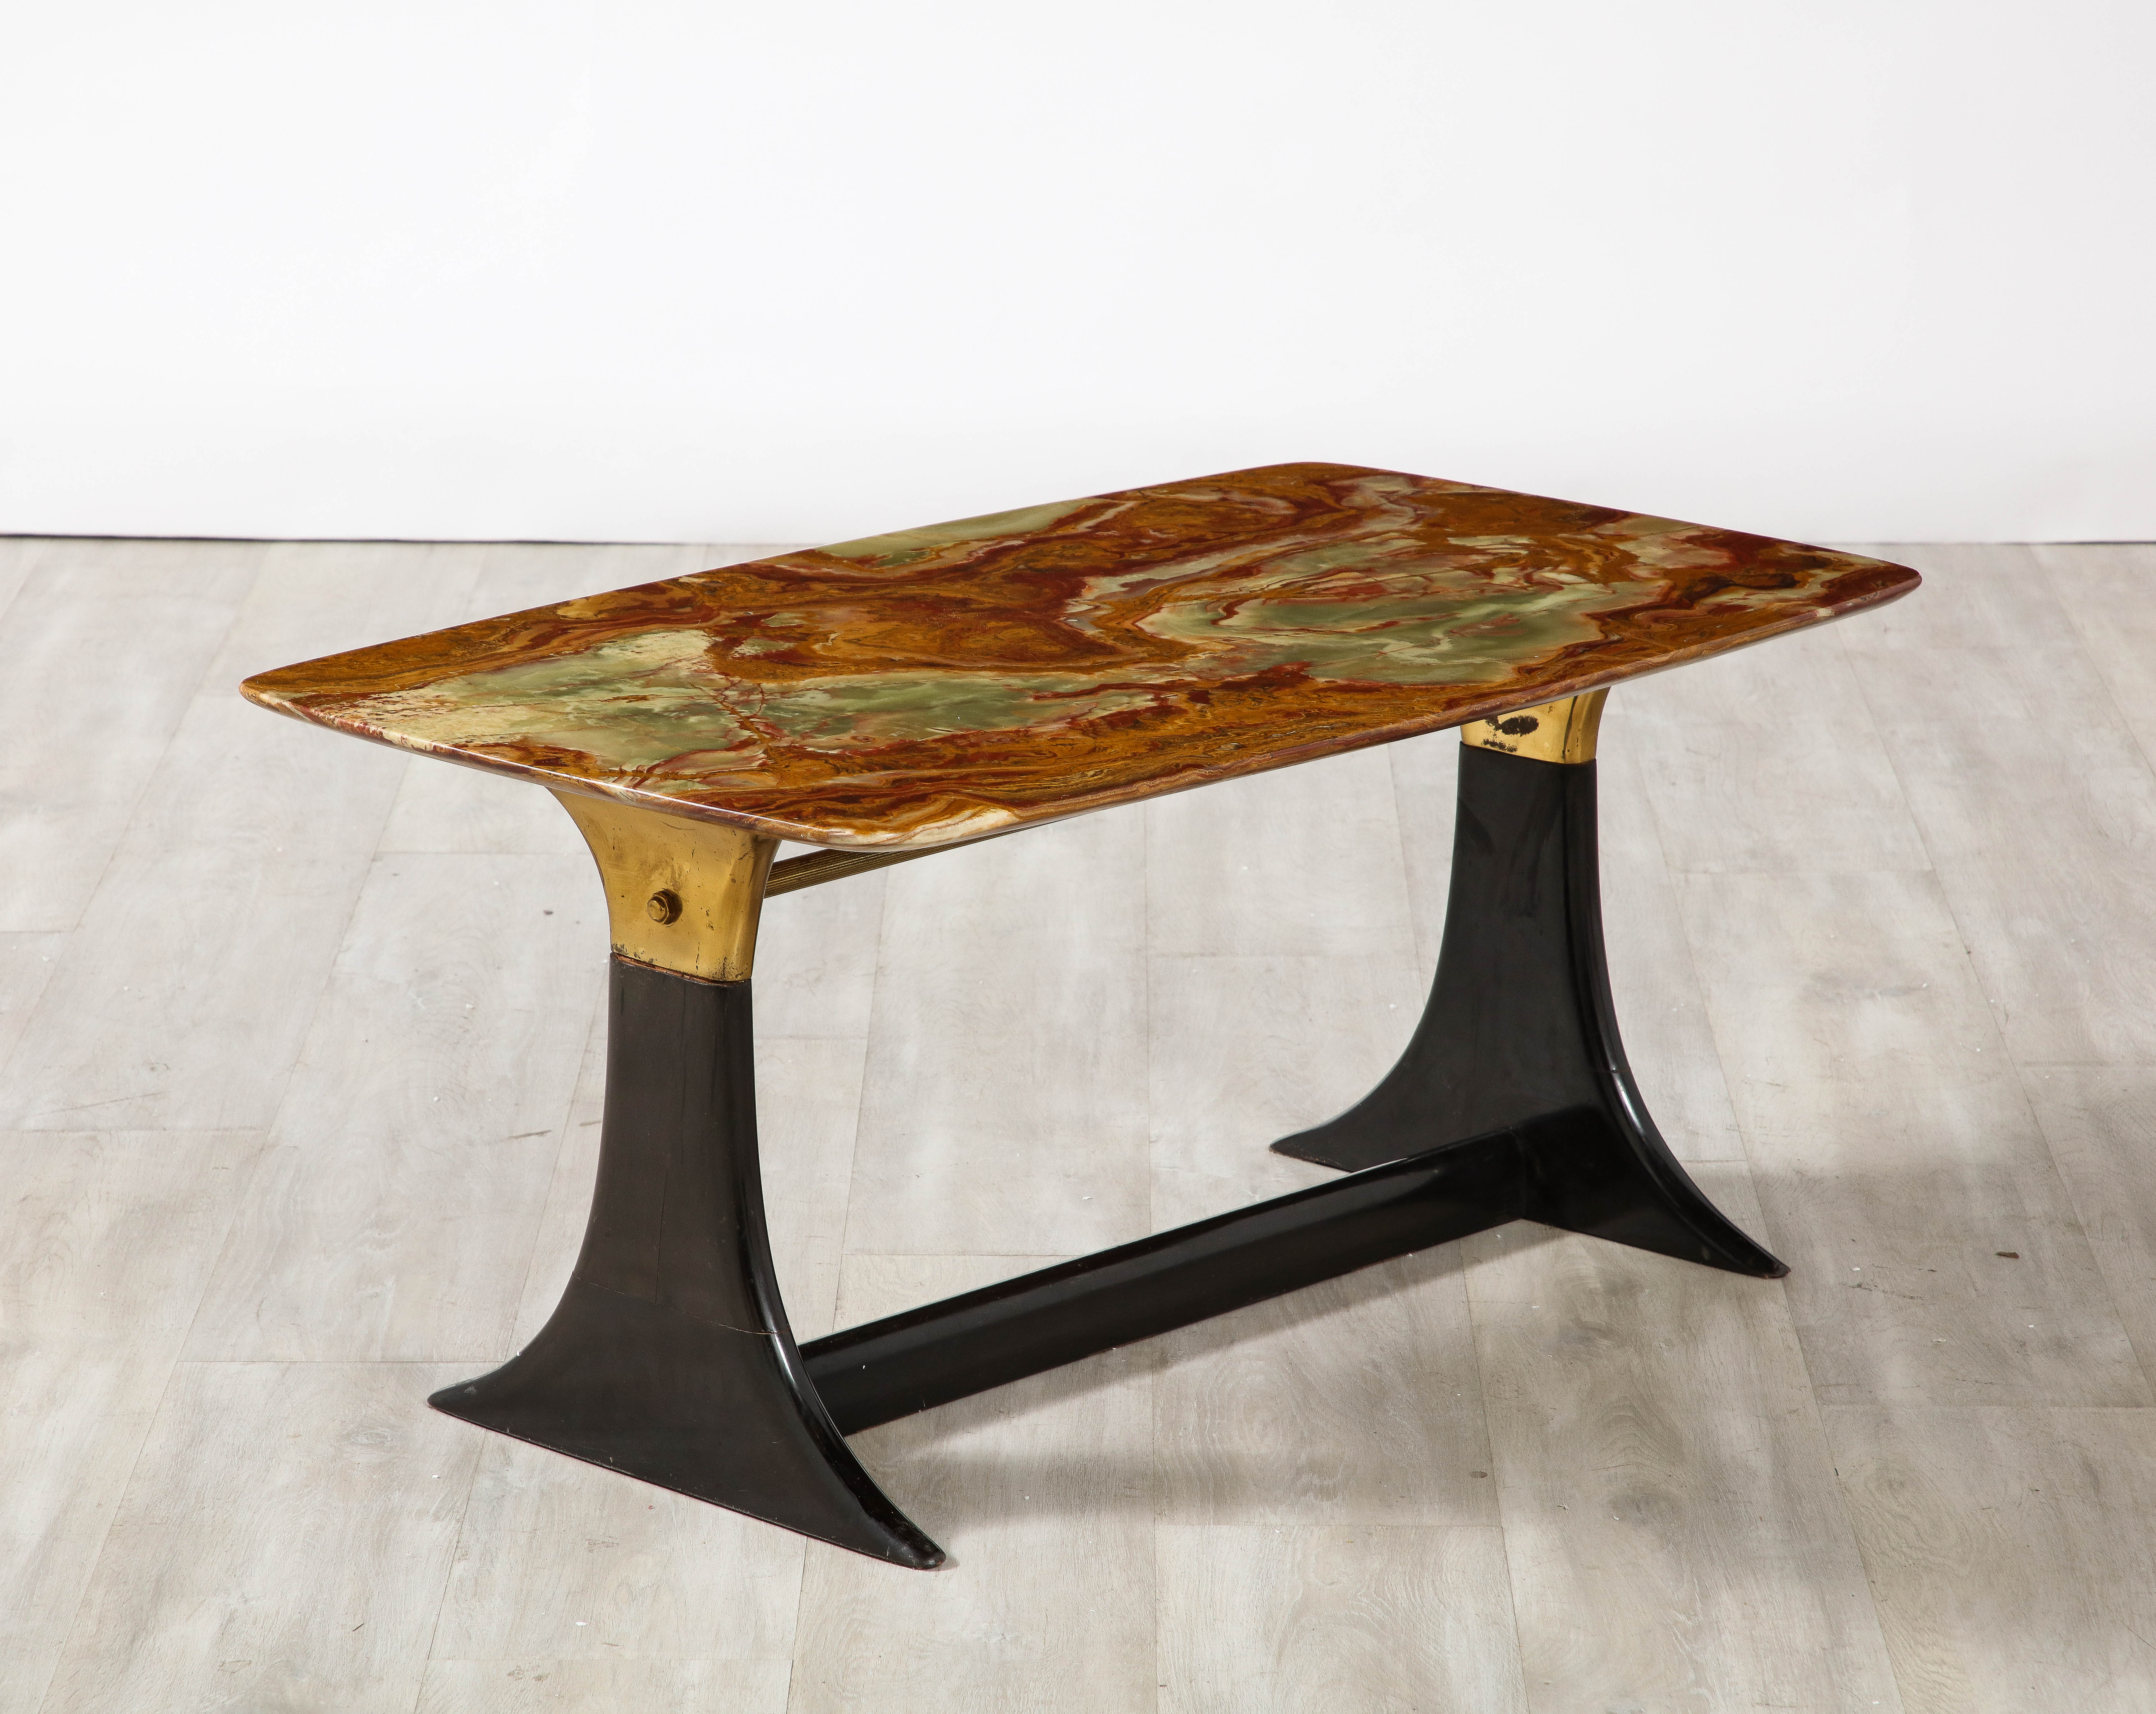 Superb walnut and brass coffee table designed by Italian mid-century designer, Guglielmo Ulrich. The stunning rectangular agate top in variations of greens, red, brown and cream, rests atop a shaped walnut and brass base with brass stretcher at the